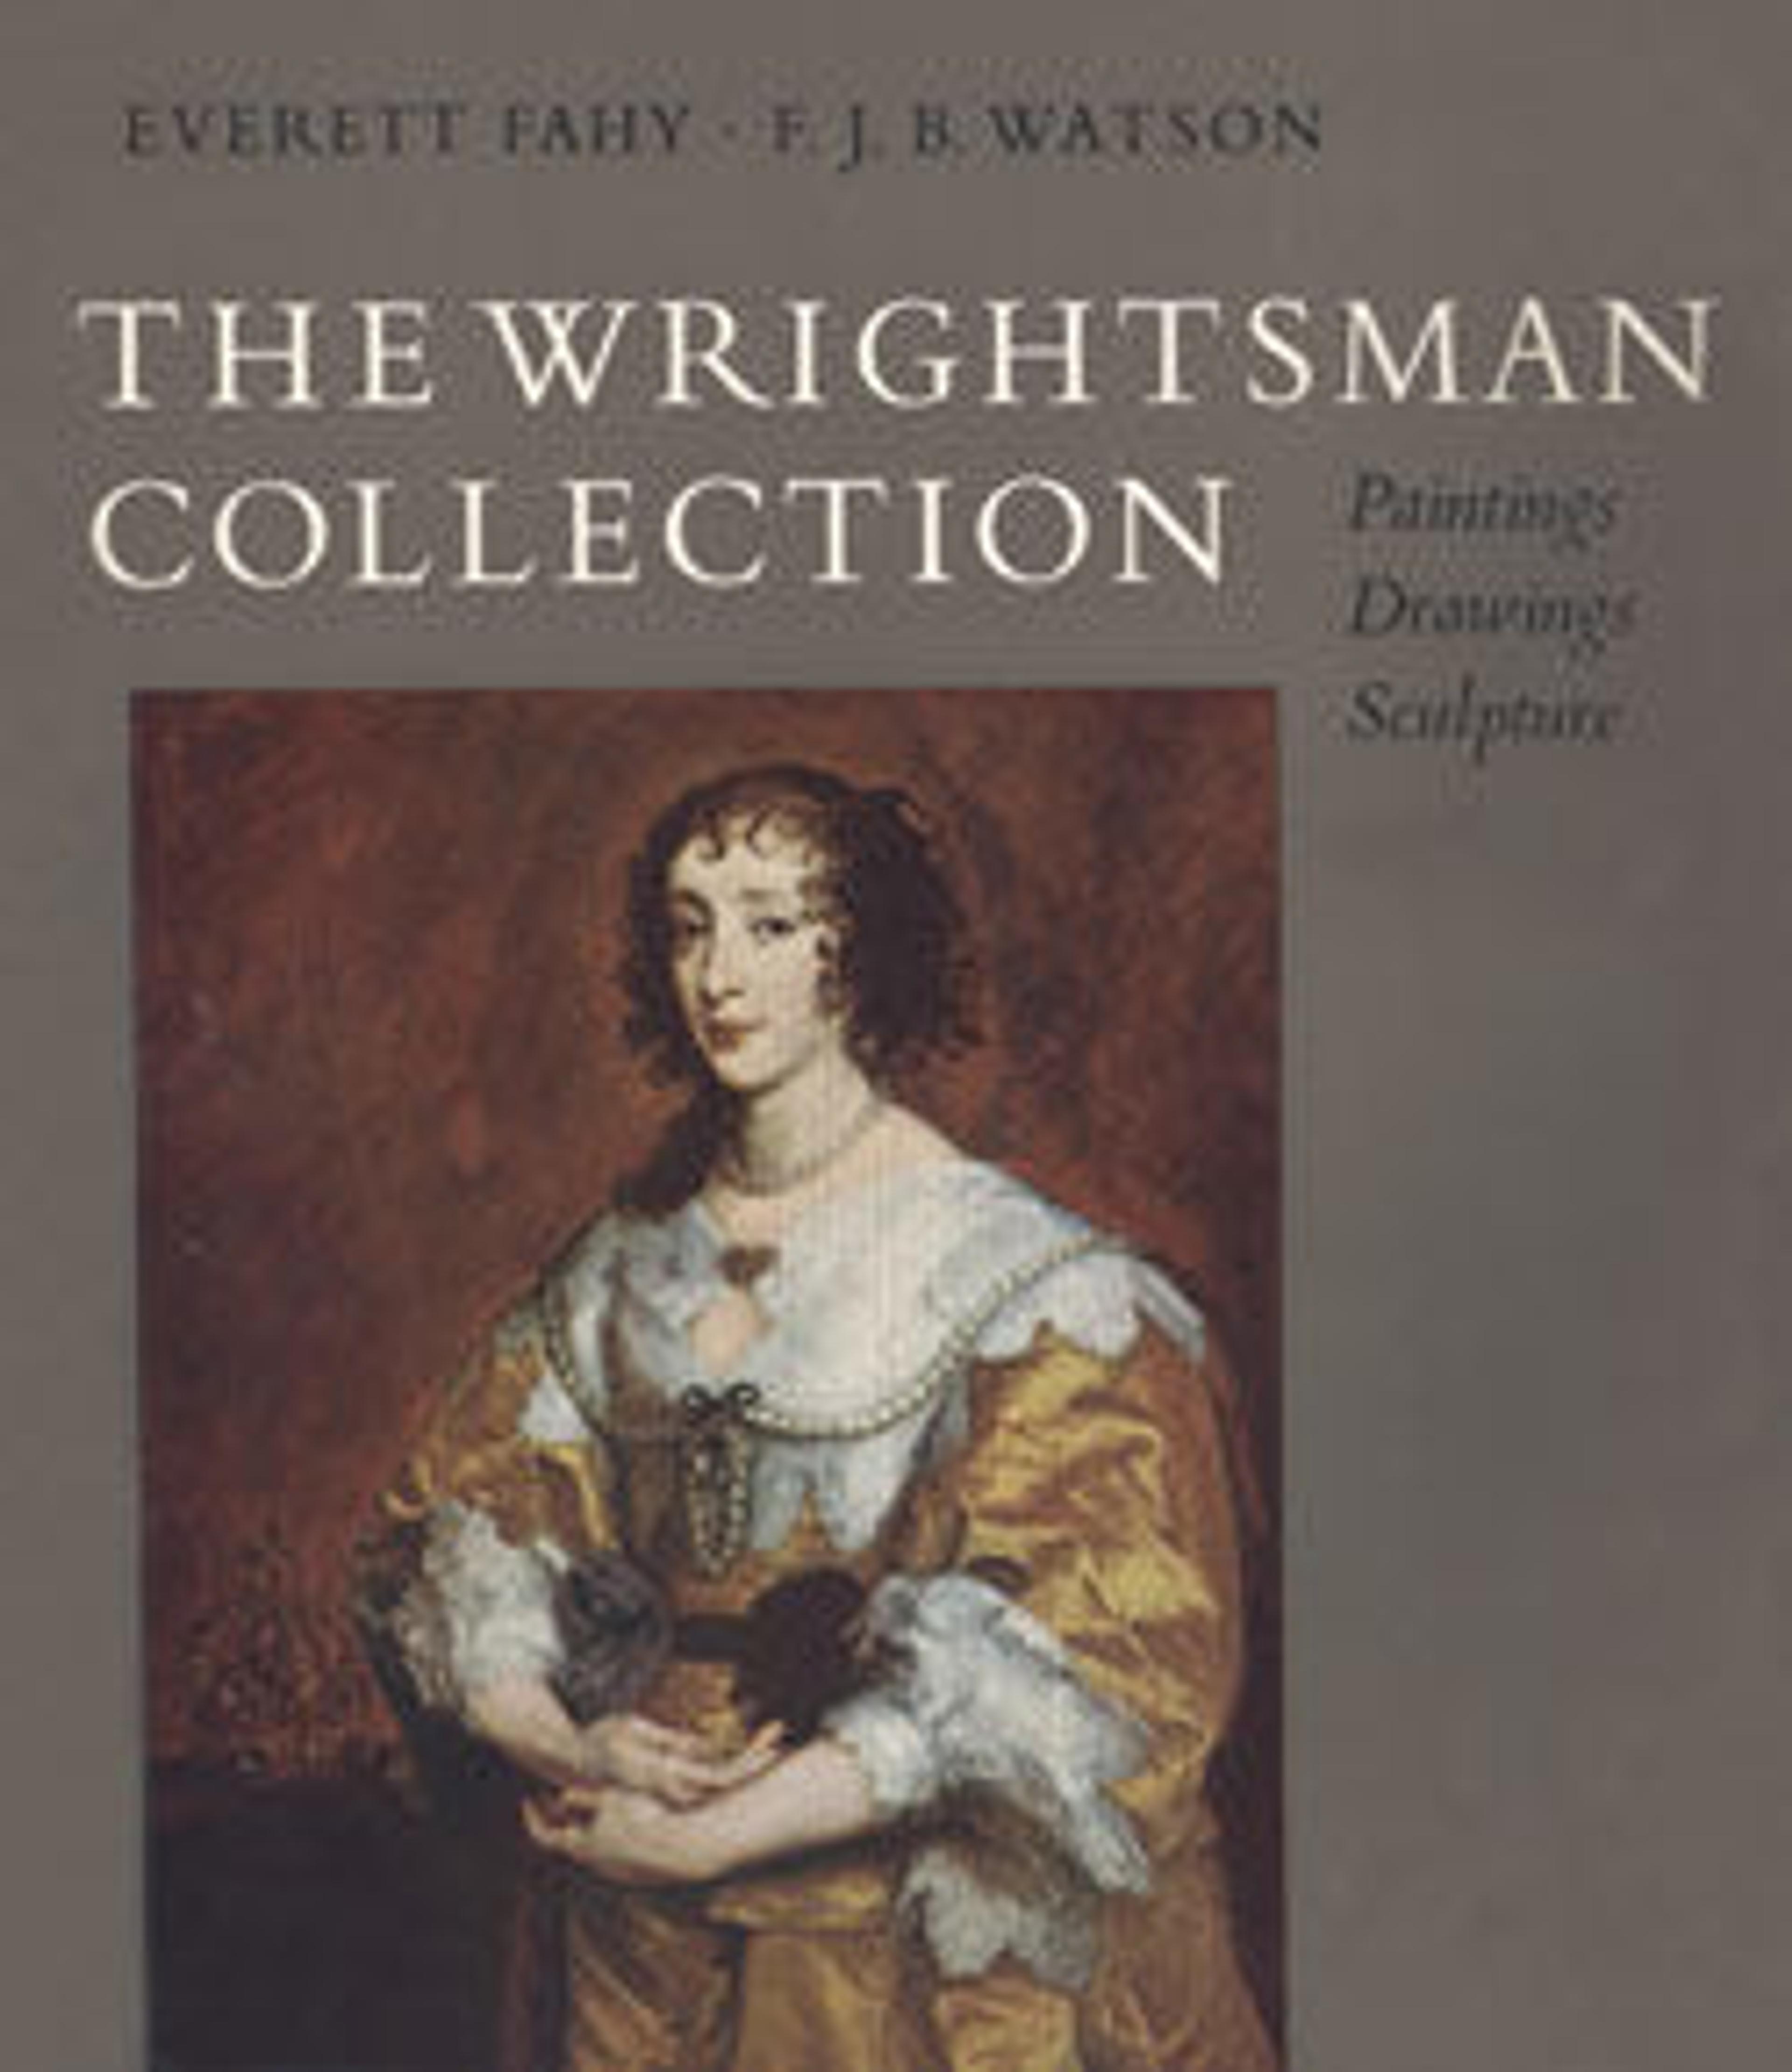 The Wrightsman Collection, Vol. 5, Paintings, Drawings, and Sculpture